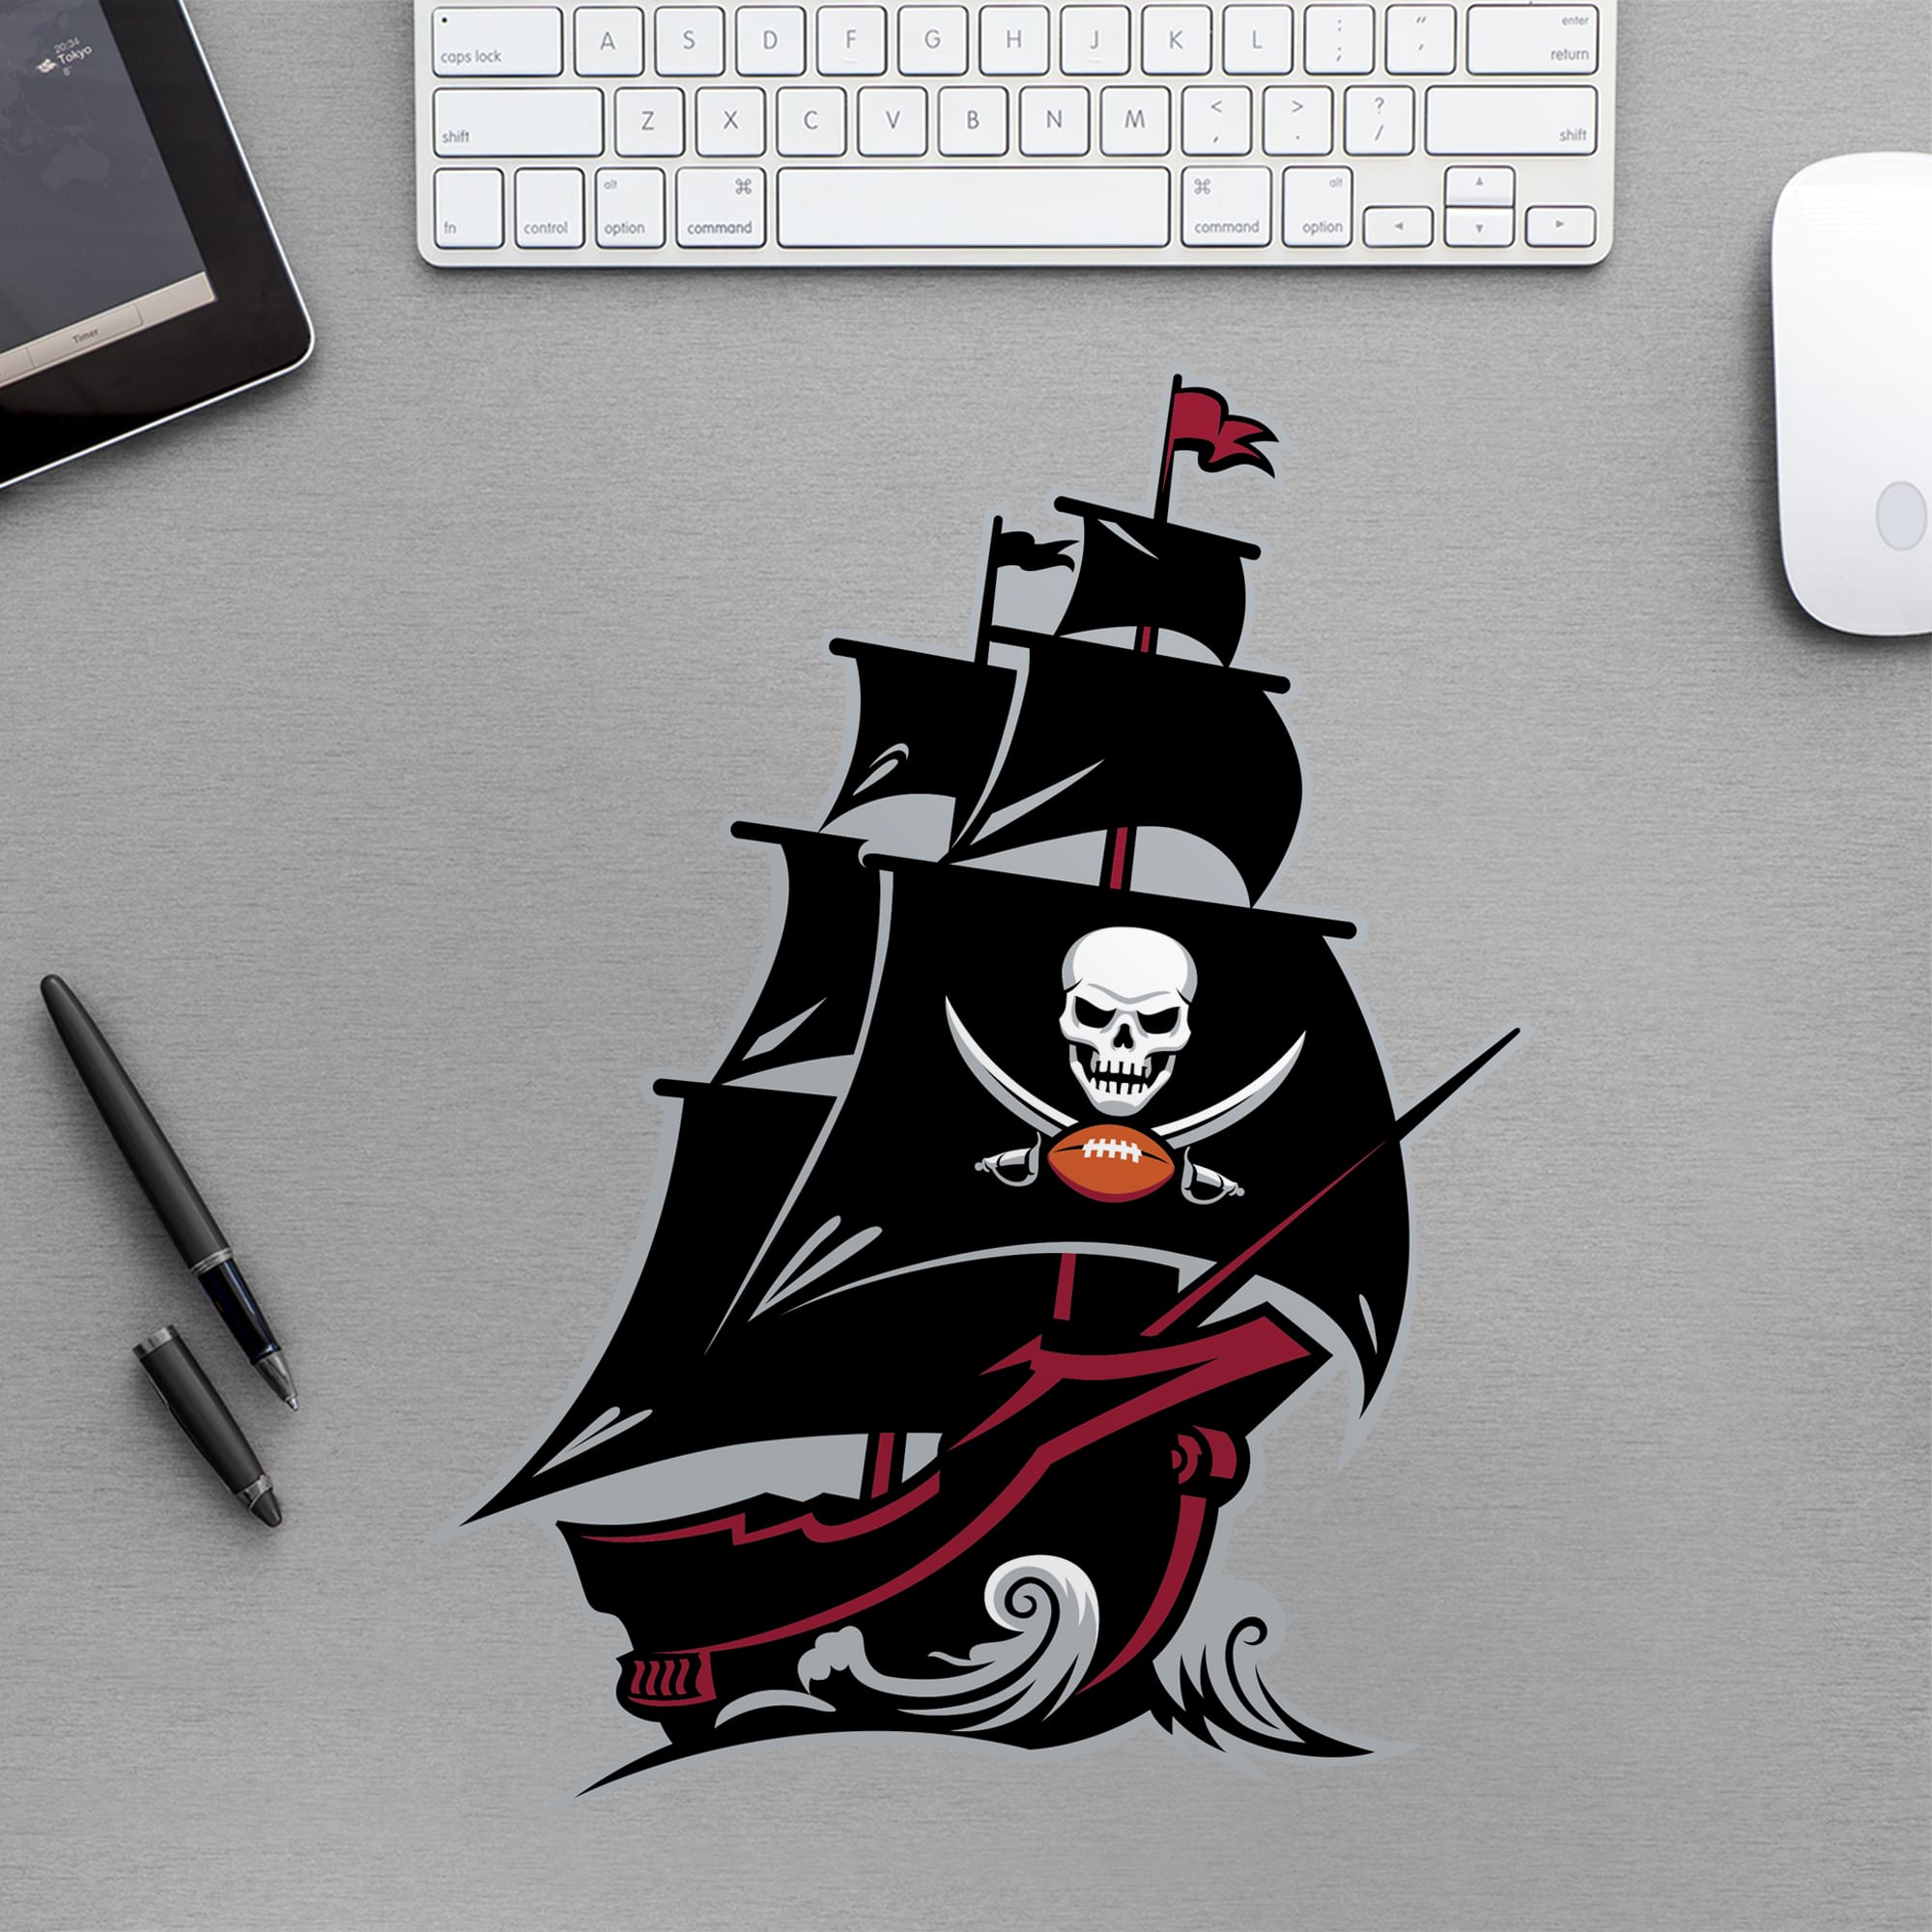 Tampa Bay Buccaneers: Pirate Ship Logo - Officially Licensed NFL Removable Wall Decal Large by Fathead | Vinyl